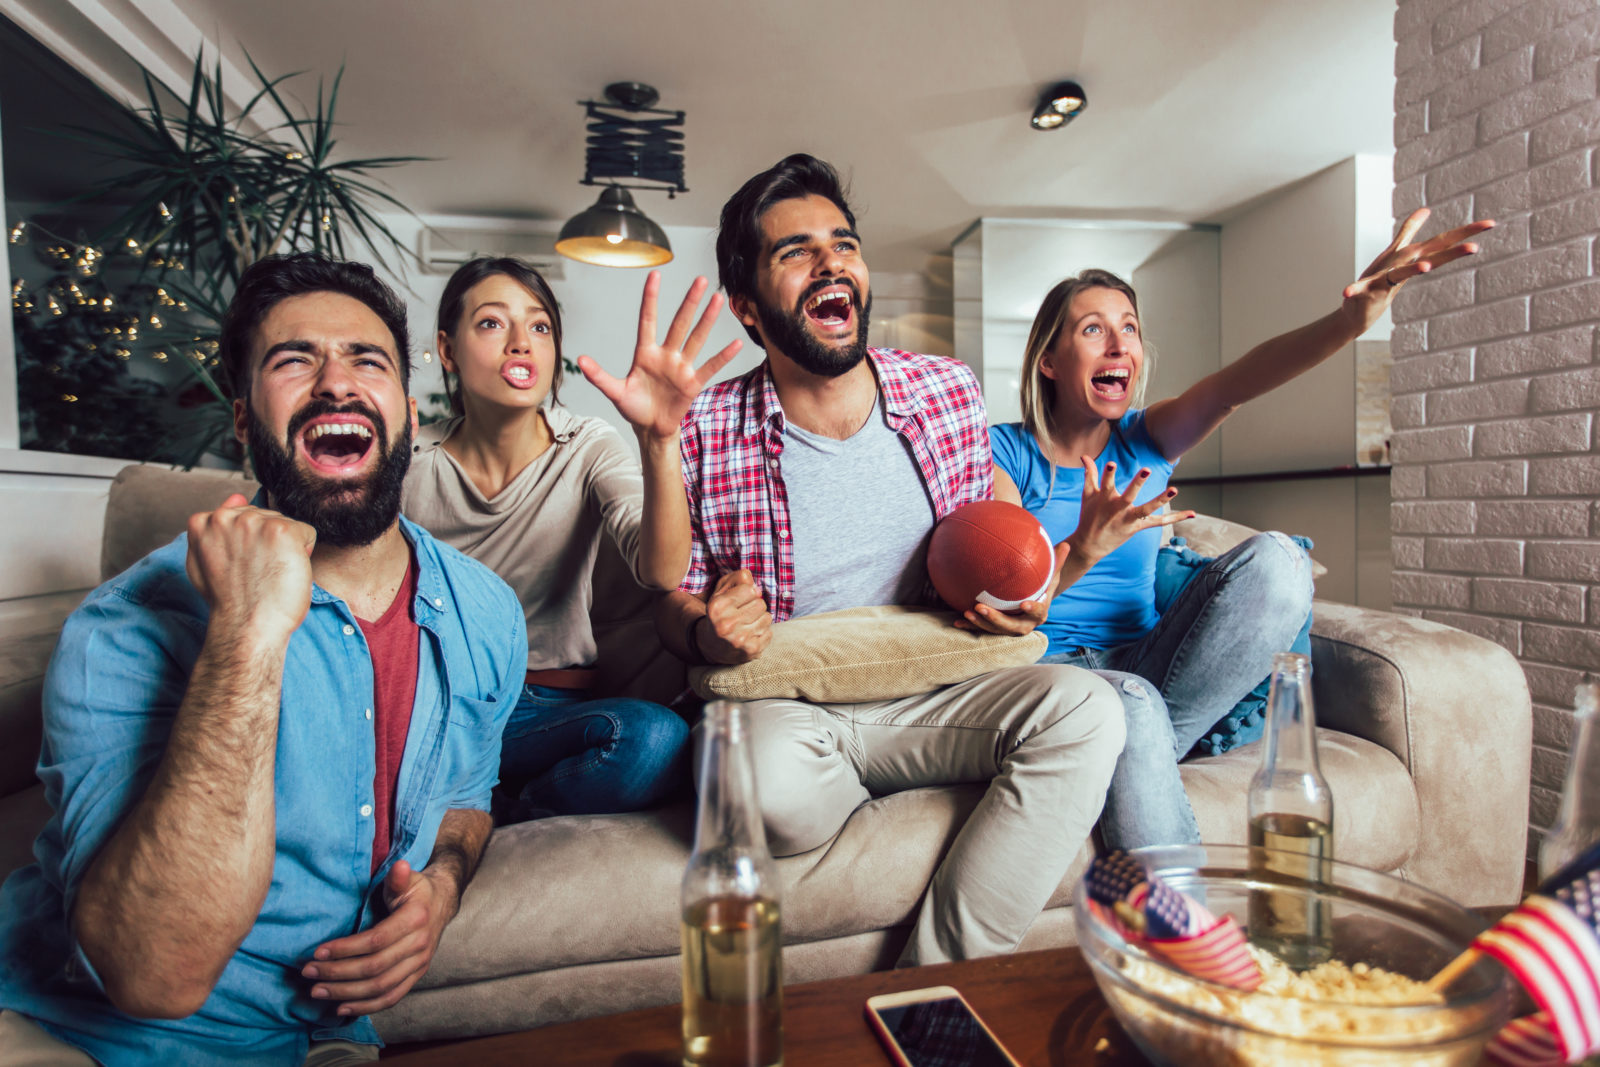 Friends cheering sport league together on tv and celebrating victory at home.Friendship, sports and entertainment concept. 2023/02/AdobeStock_274349745.jpeg 